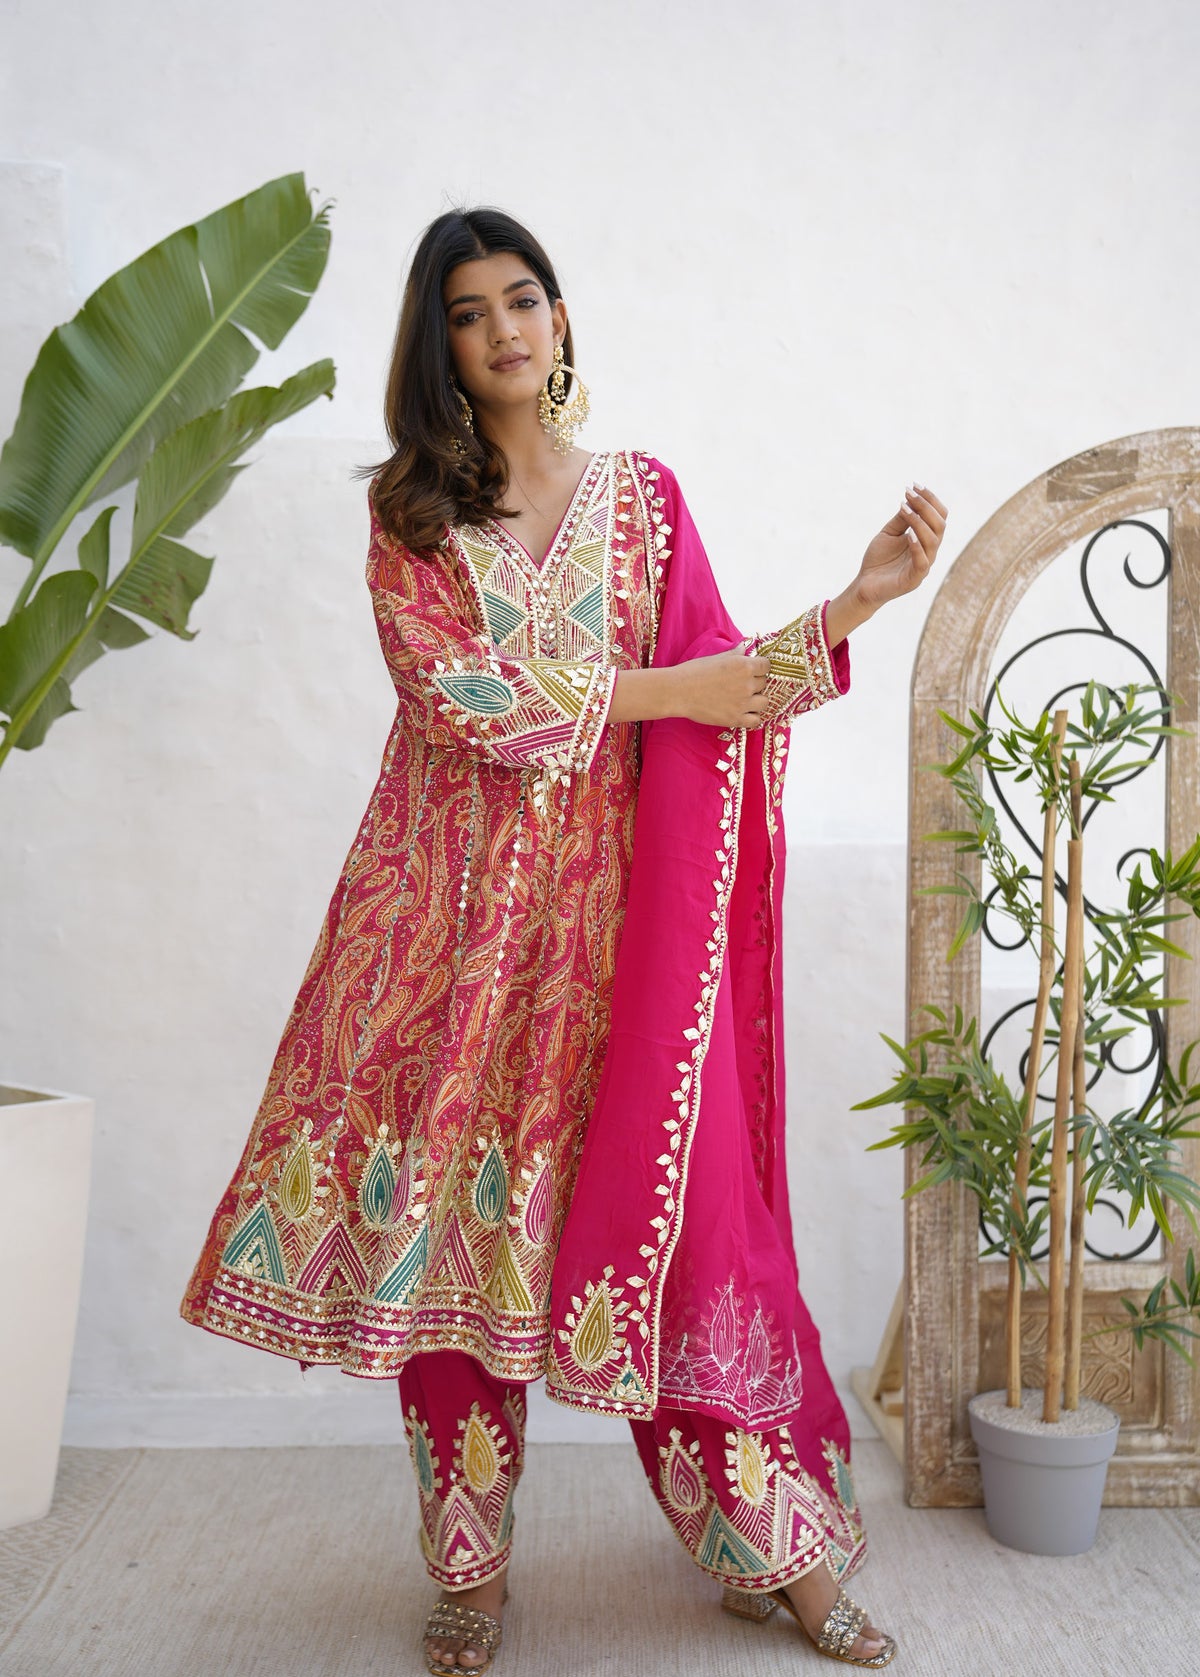 Carrot Coloured Crepe Gota Patti Suit Contrasting With Magenta Dupatta And Salwar